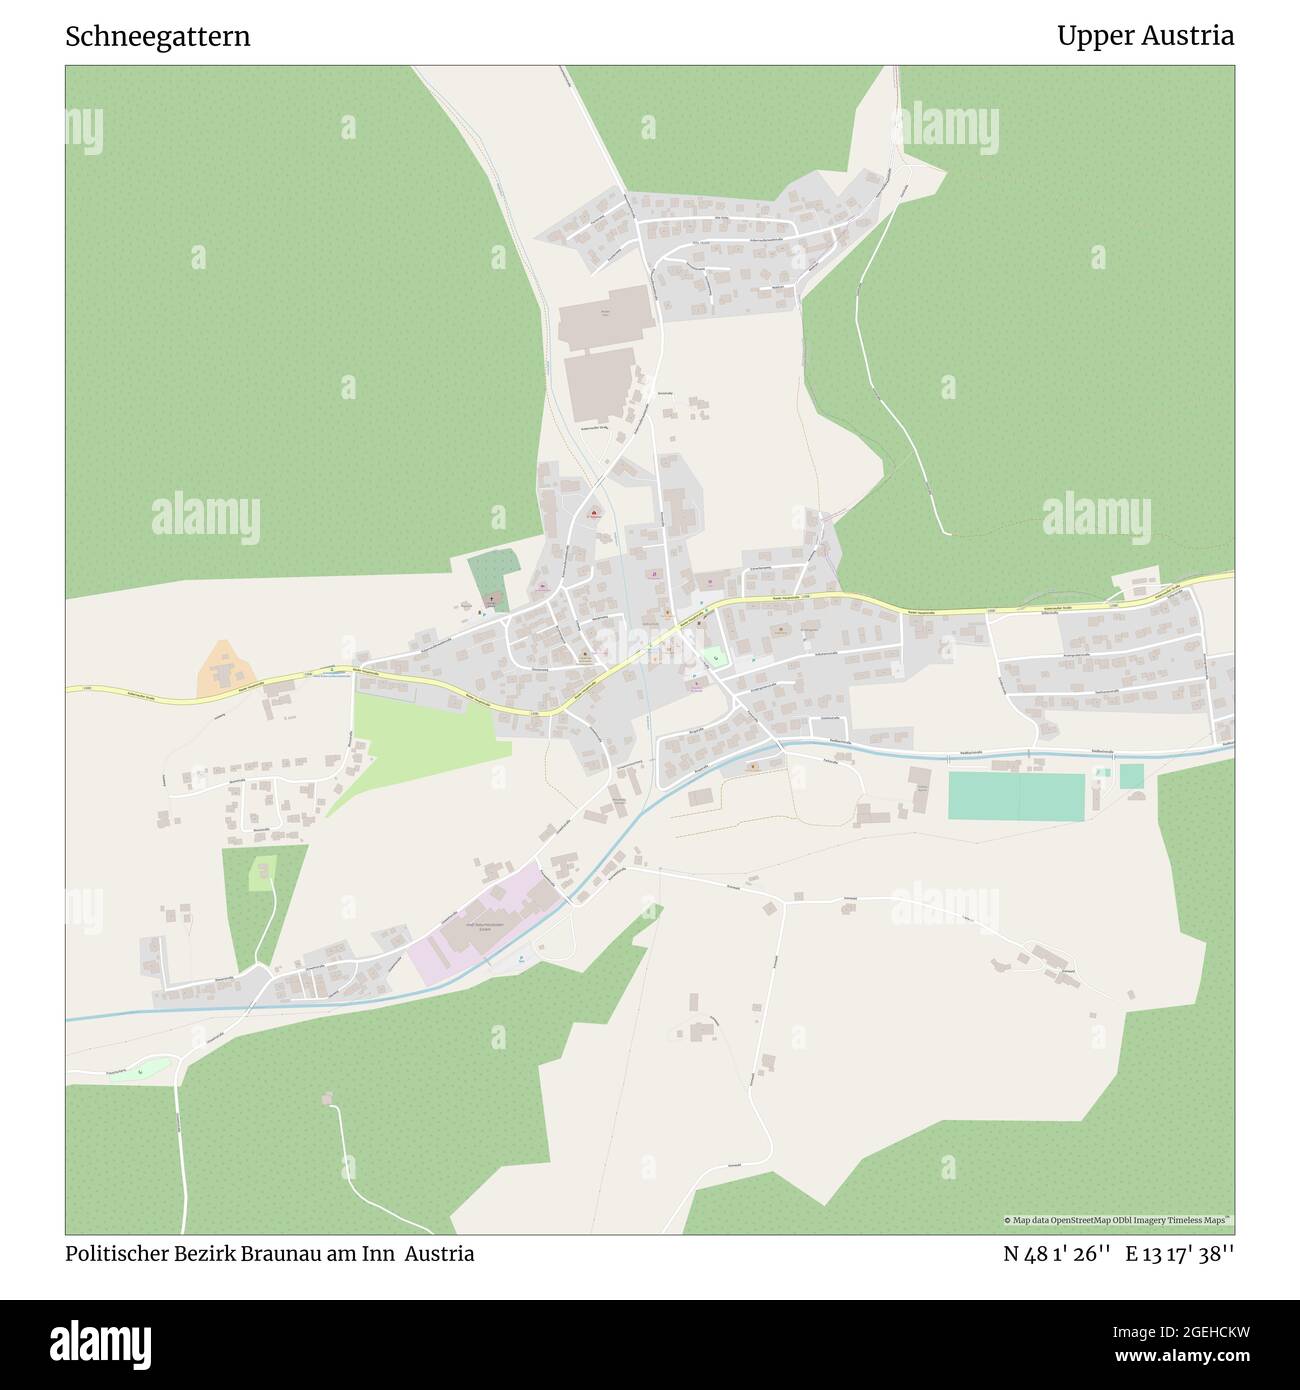 Schneegattern, Politischer Bezirk Braunau am Inn, Austria, Upper Austria, N 48 1' 26'', E 13 17' 38'', map, Timeless Map published in 2021. Travelers, explorers and adventurers like Florence Nightingale, David Livingstone, Ernest Shackleton, Lewis and Clark and Sherlock Holmes relied on maps to plan travels to the world's most remote corners, Timeless Maps is mapping most locations on the globe, showing the achievement of great dreams Stock Photo